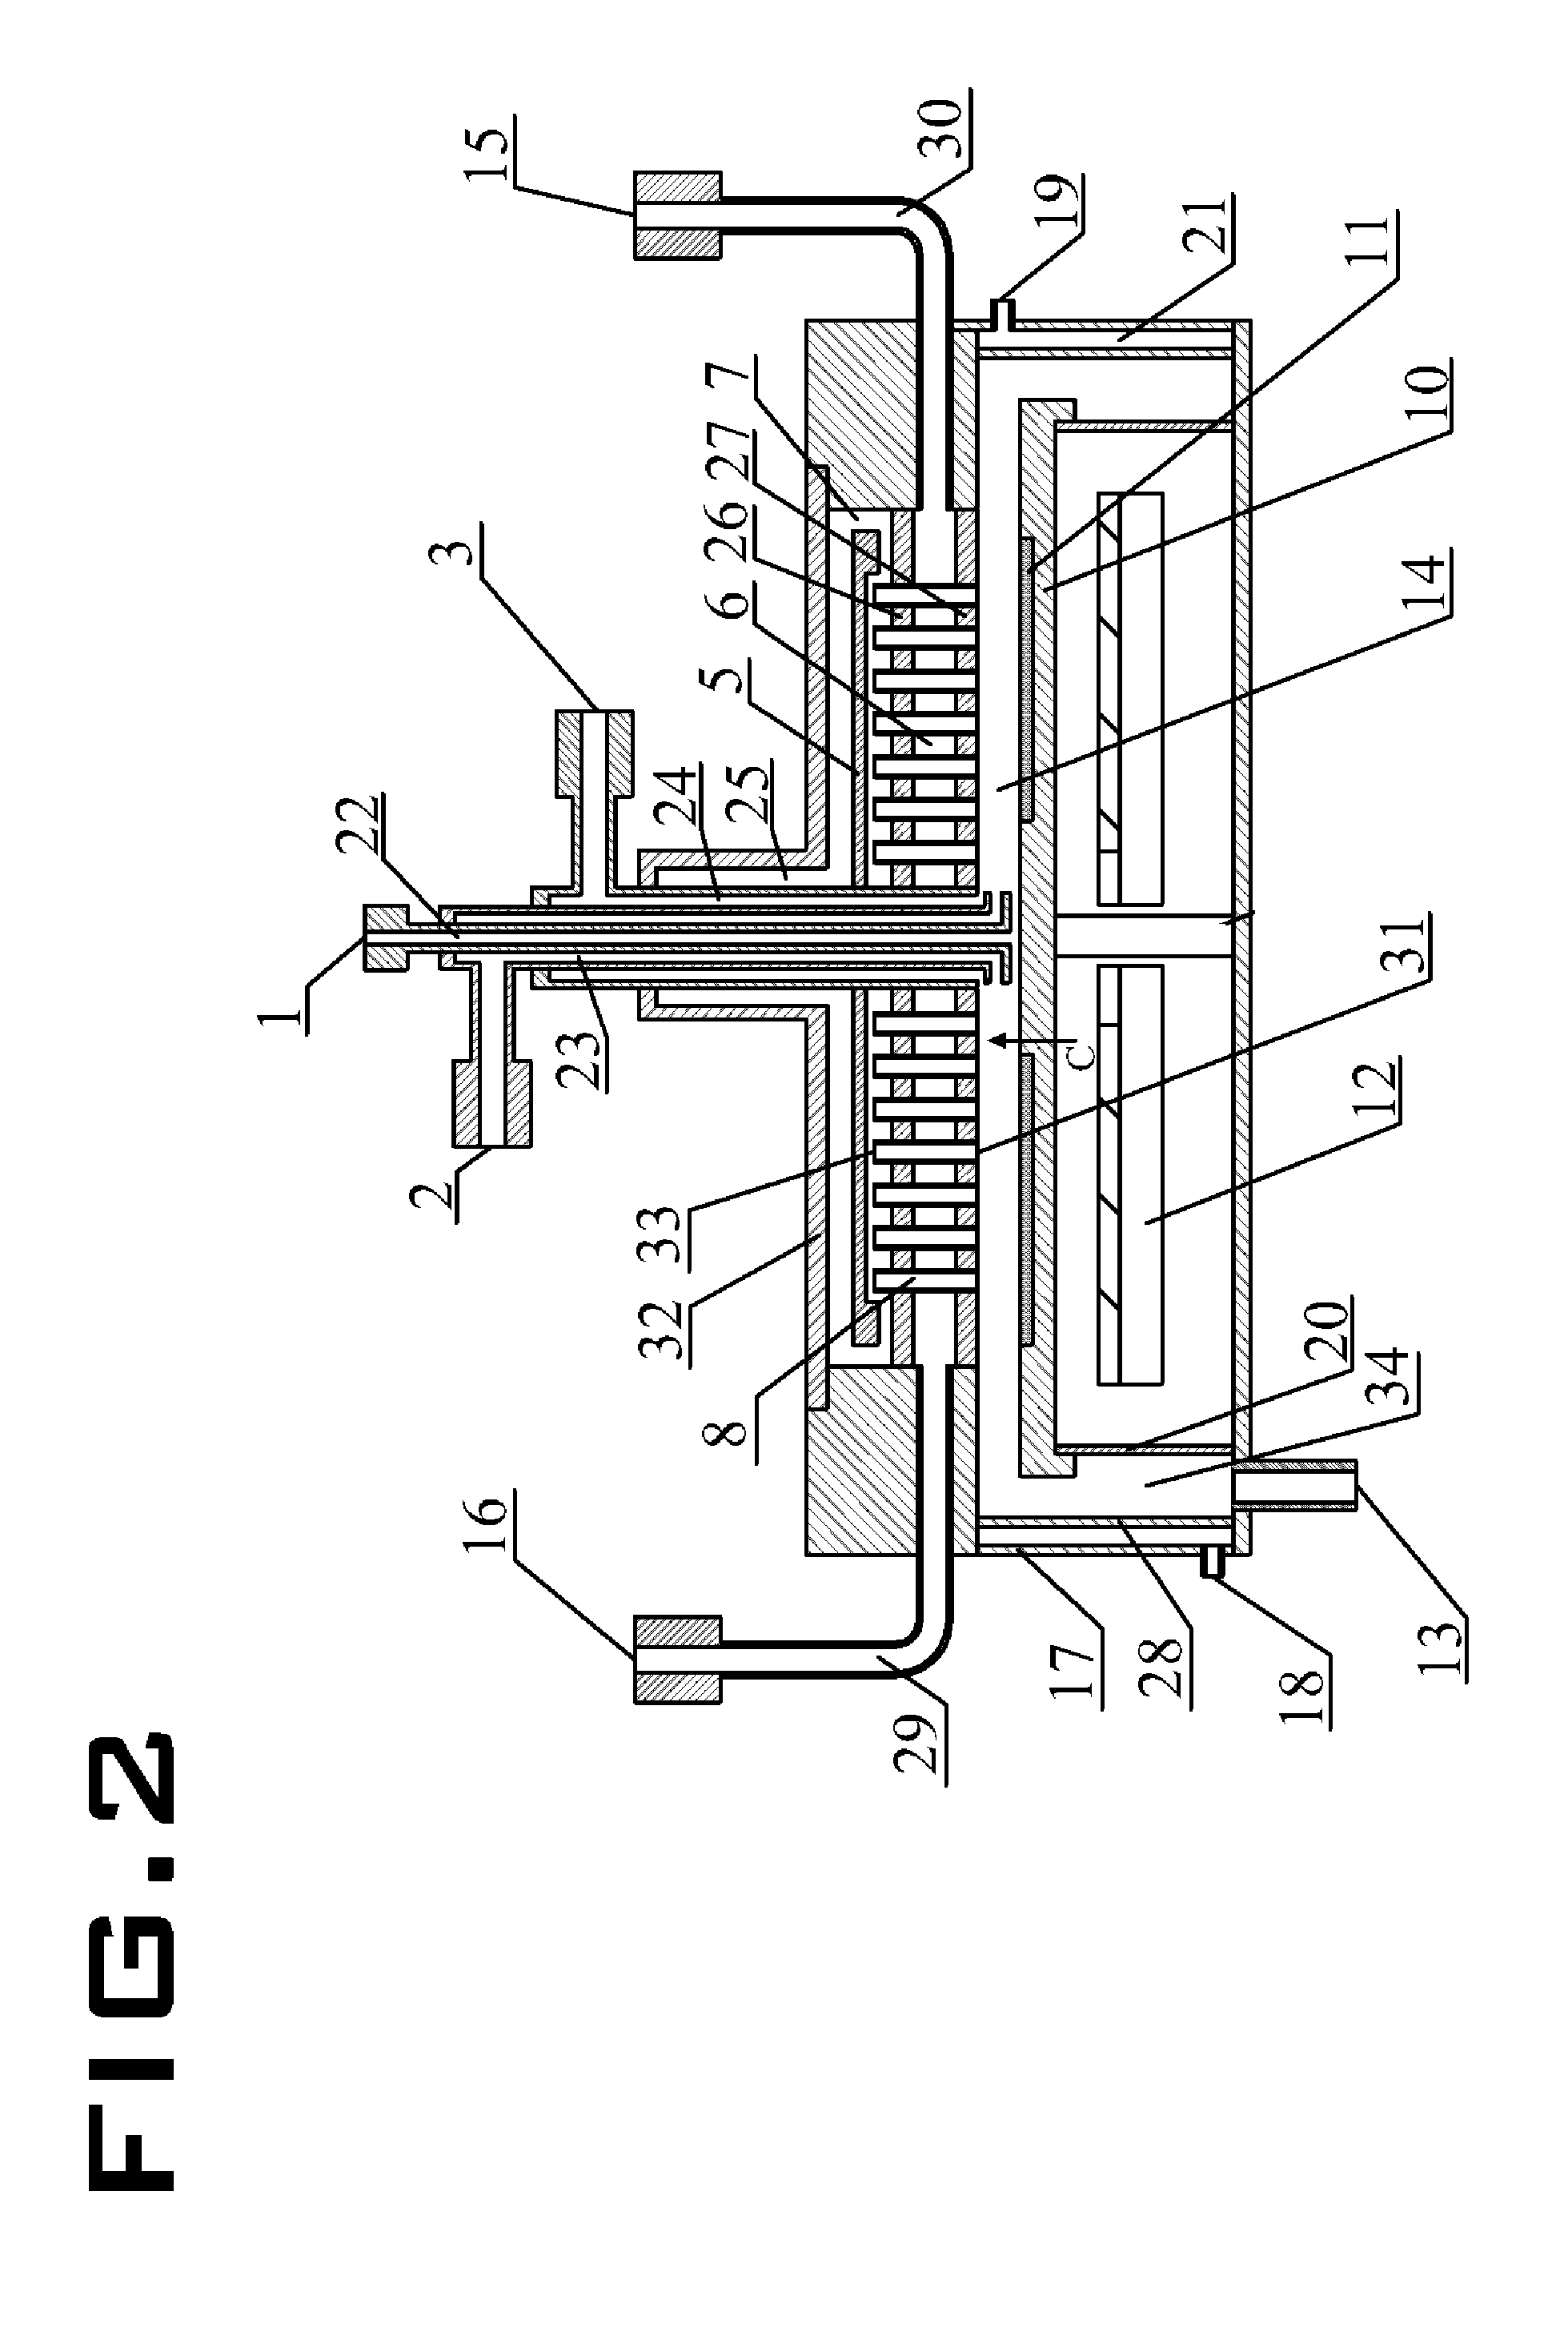 Methods and apparatus for epitaxial growth of semiconductor materials